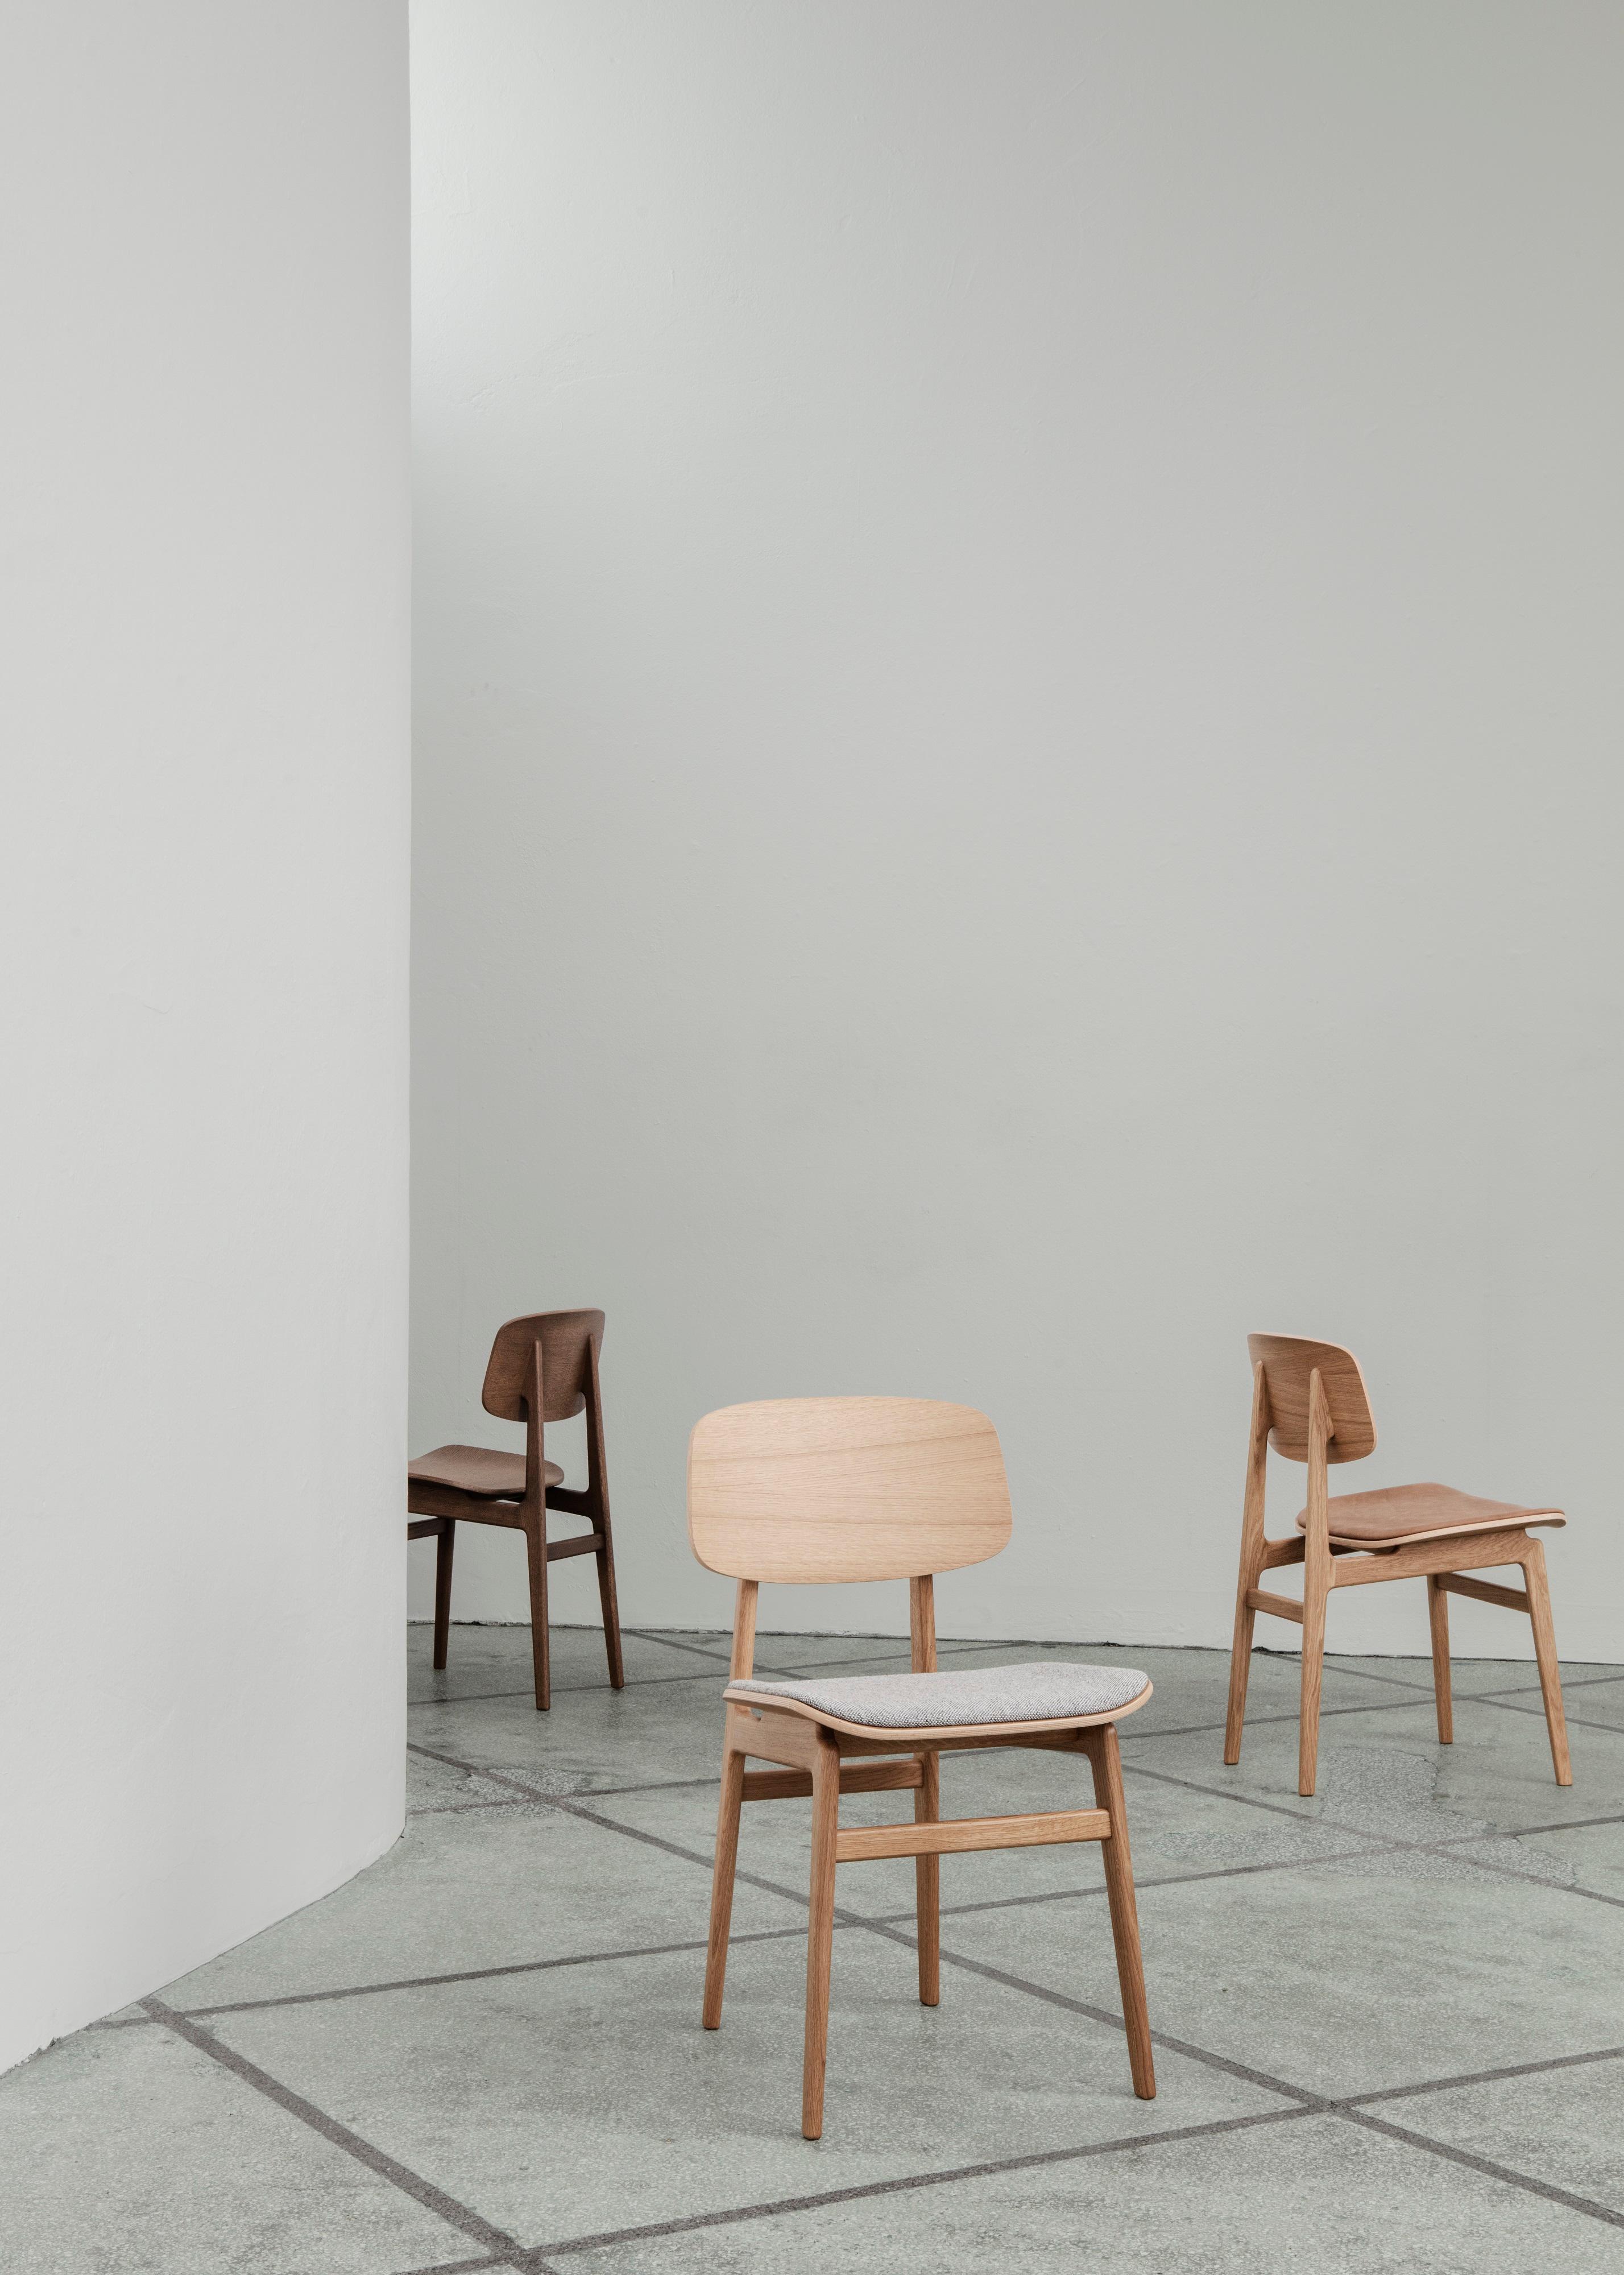 NY11 Chair by NORR11
Dimensions: D 52 x W 45,5 x H 78 cm. SH 45,5 cm / SH w. upholstery 46,5 cm.
Materials: Natural oak and upholstery.
Upholstery: Canvas 114.

Available in different oak finishes: Natural oak, light smoked oak, dark smoked oak,